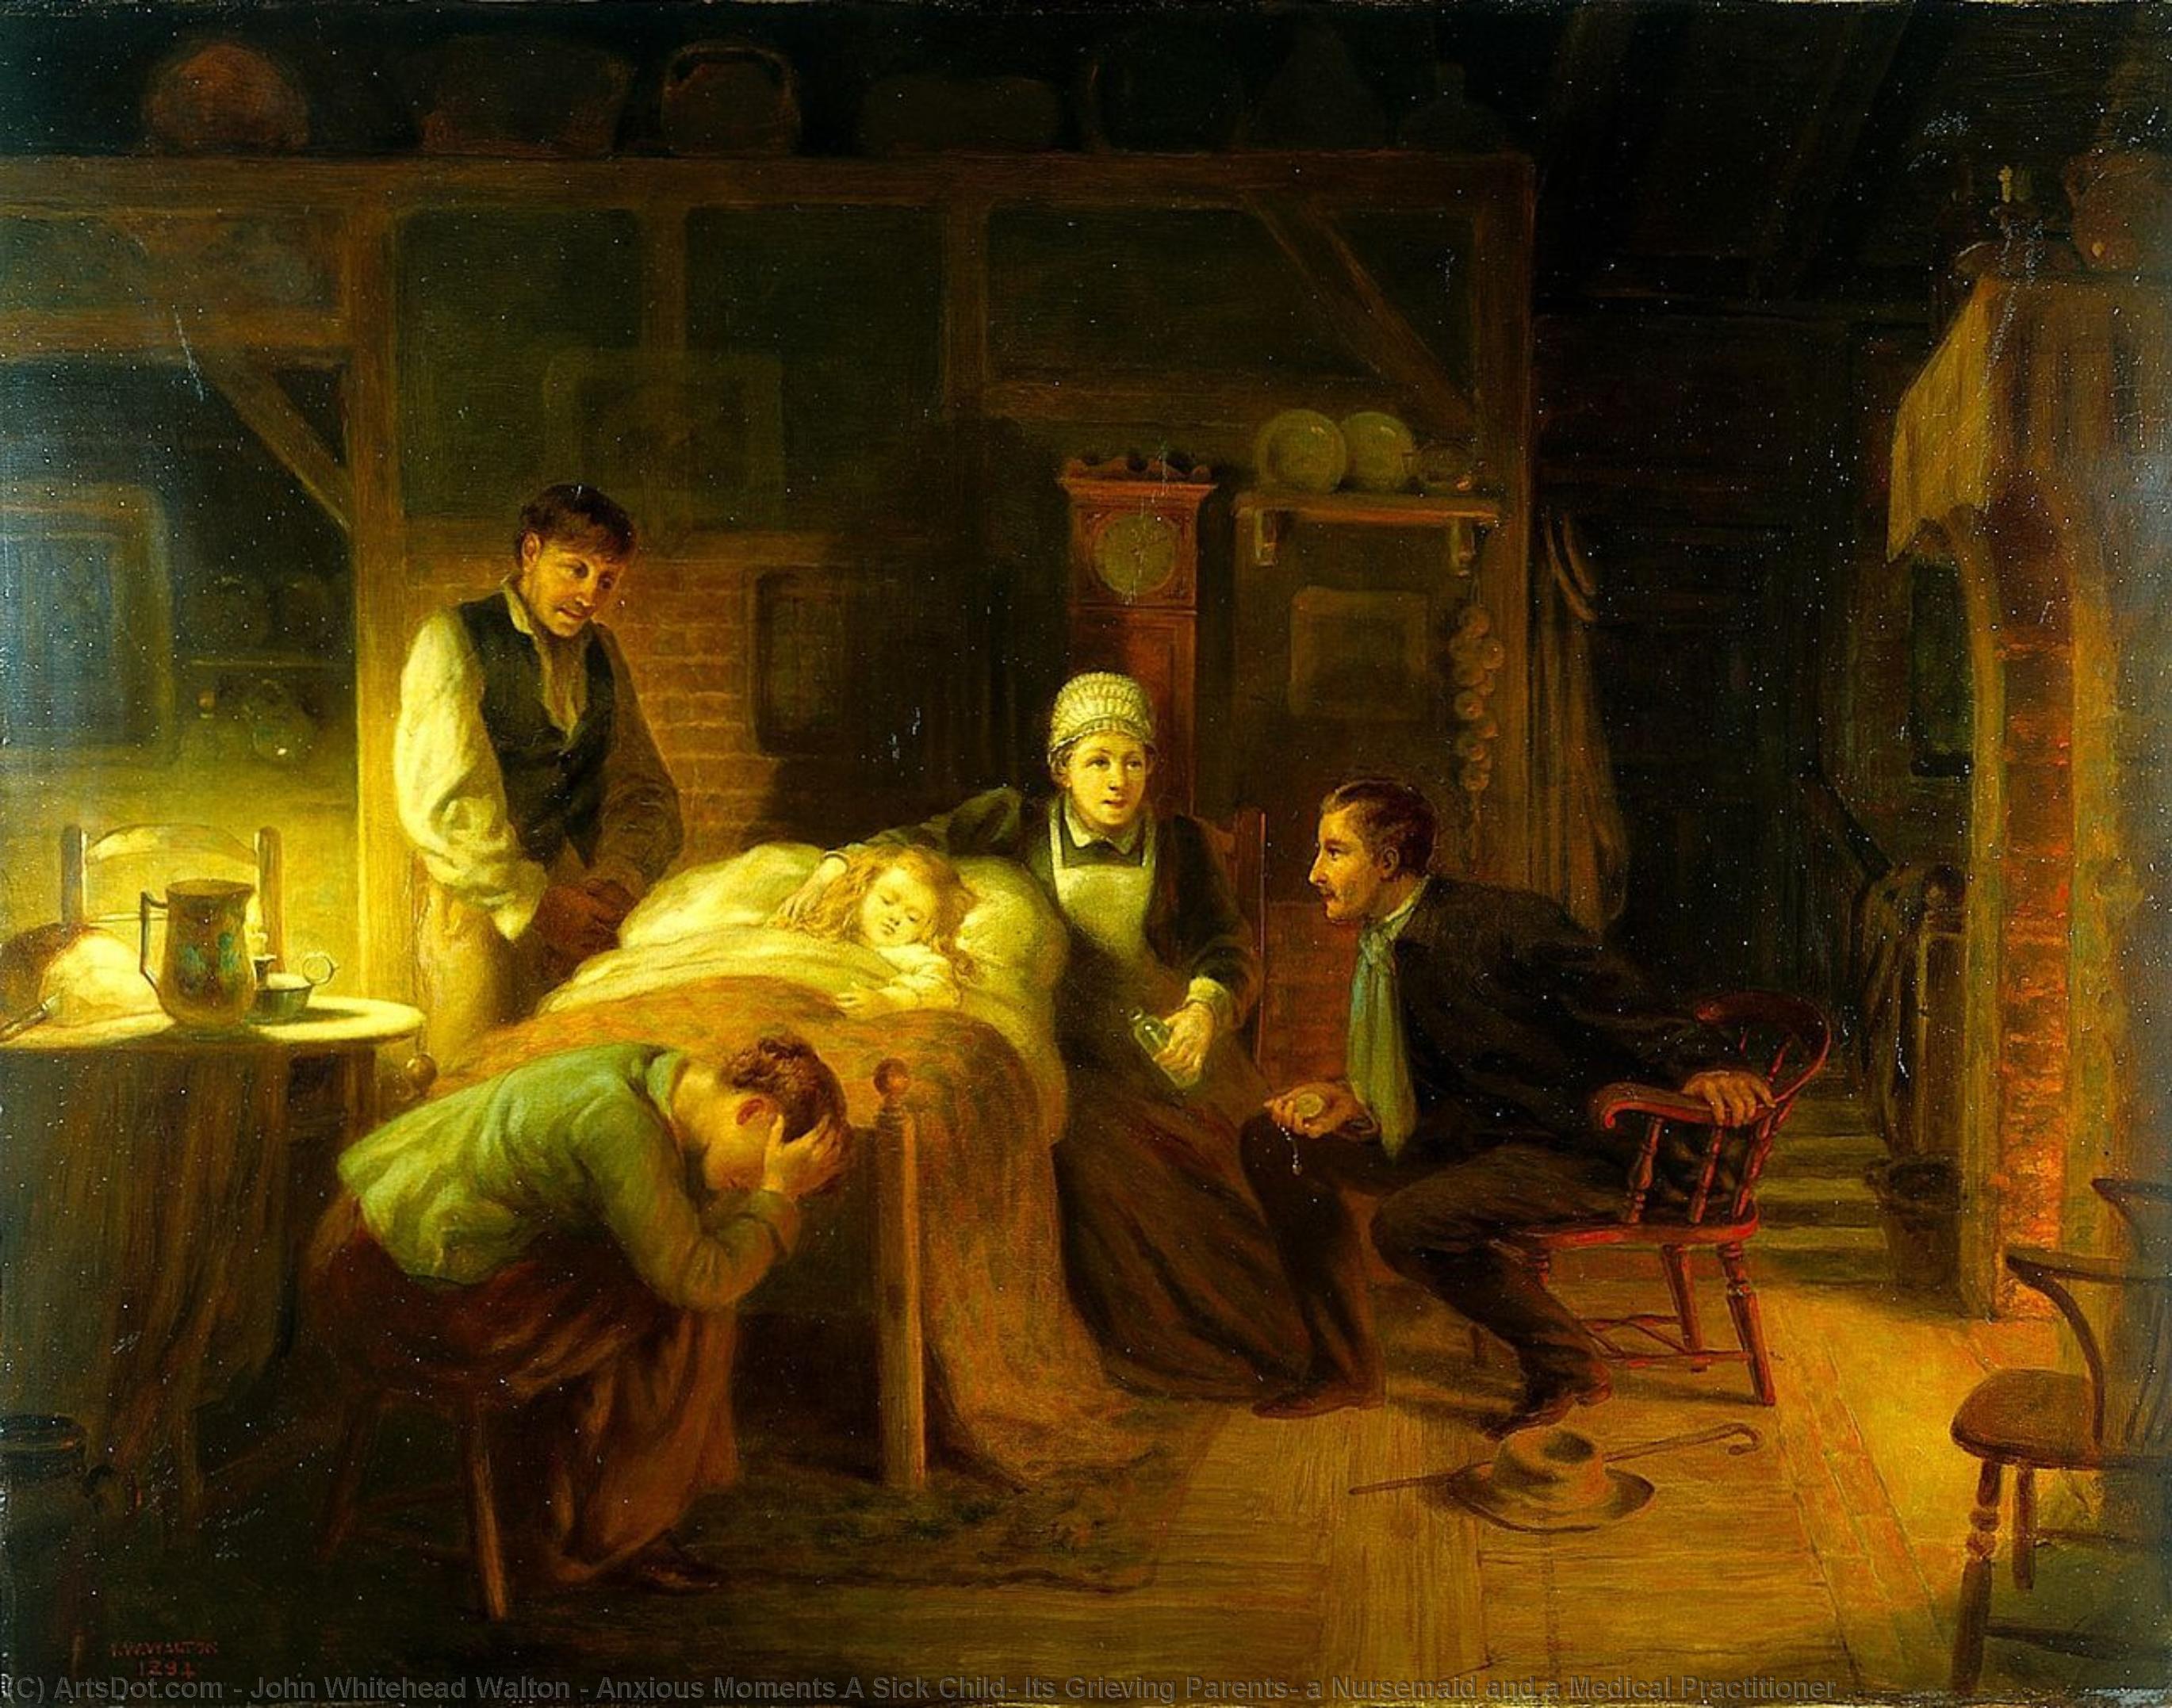 Buy Museum Art Reproductions Anxious Moments A Sick Child, Its Grieving Parents, a Nursemaid and a Medical Practitioner, 1894 by John Whitehead Walton (1815-1895) | ArtsDot.com